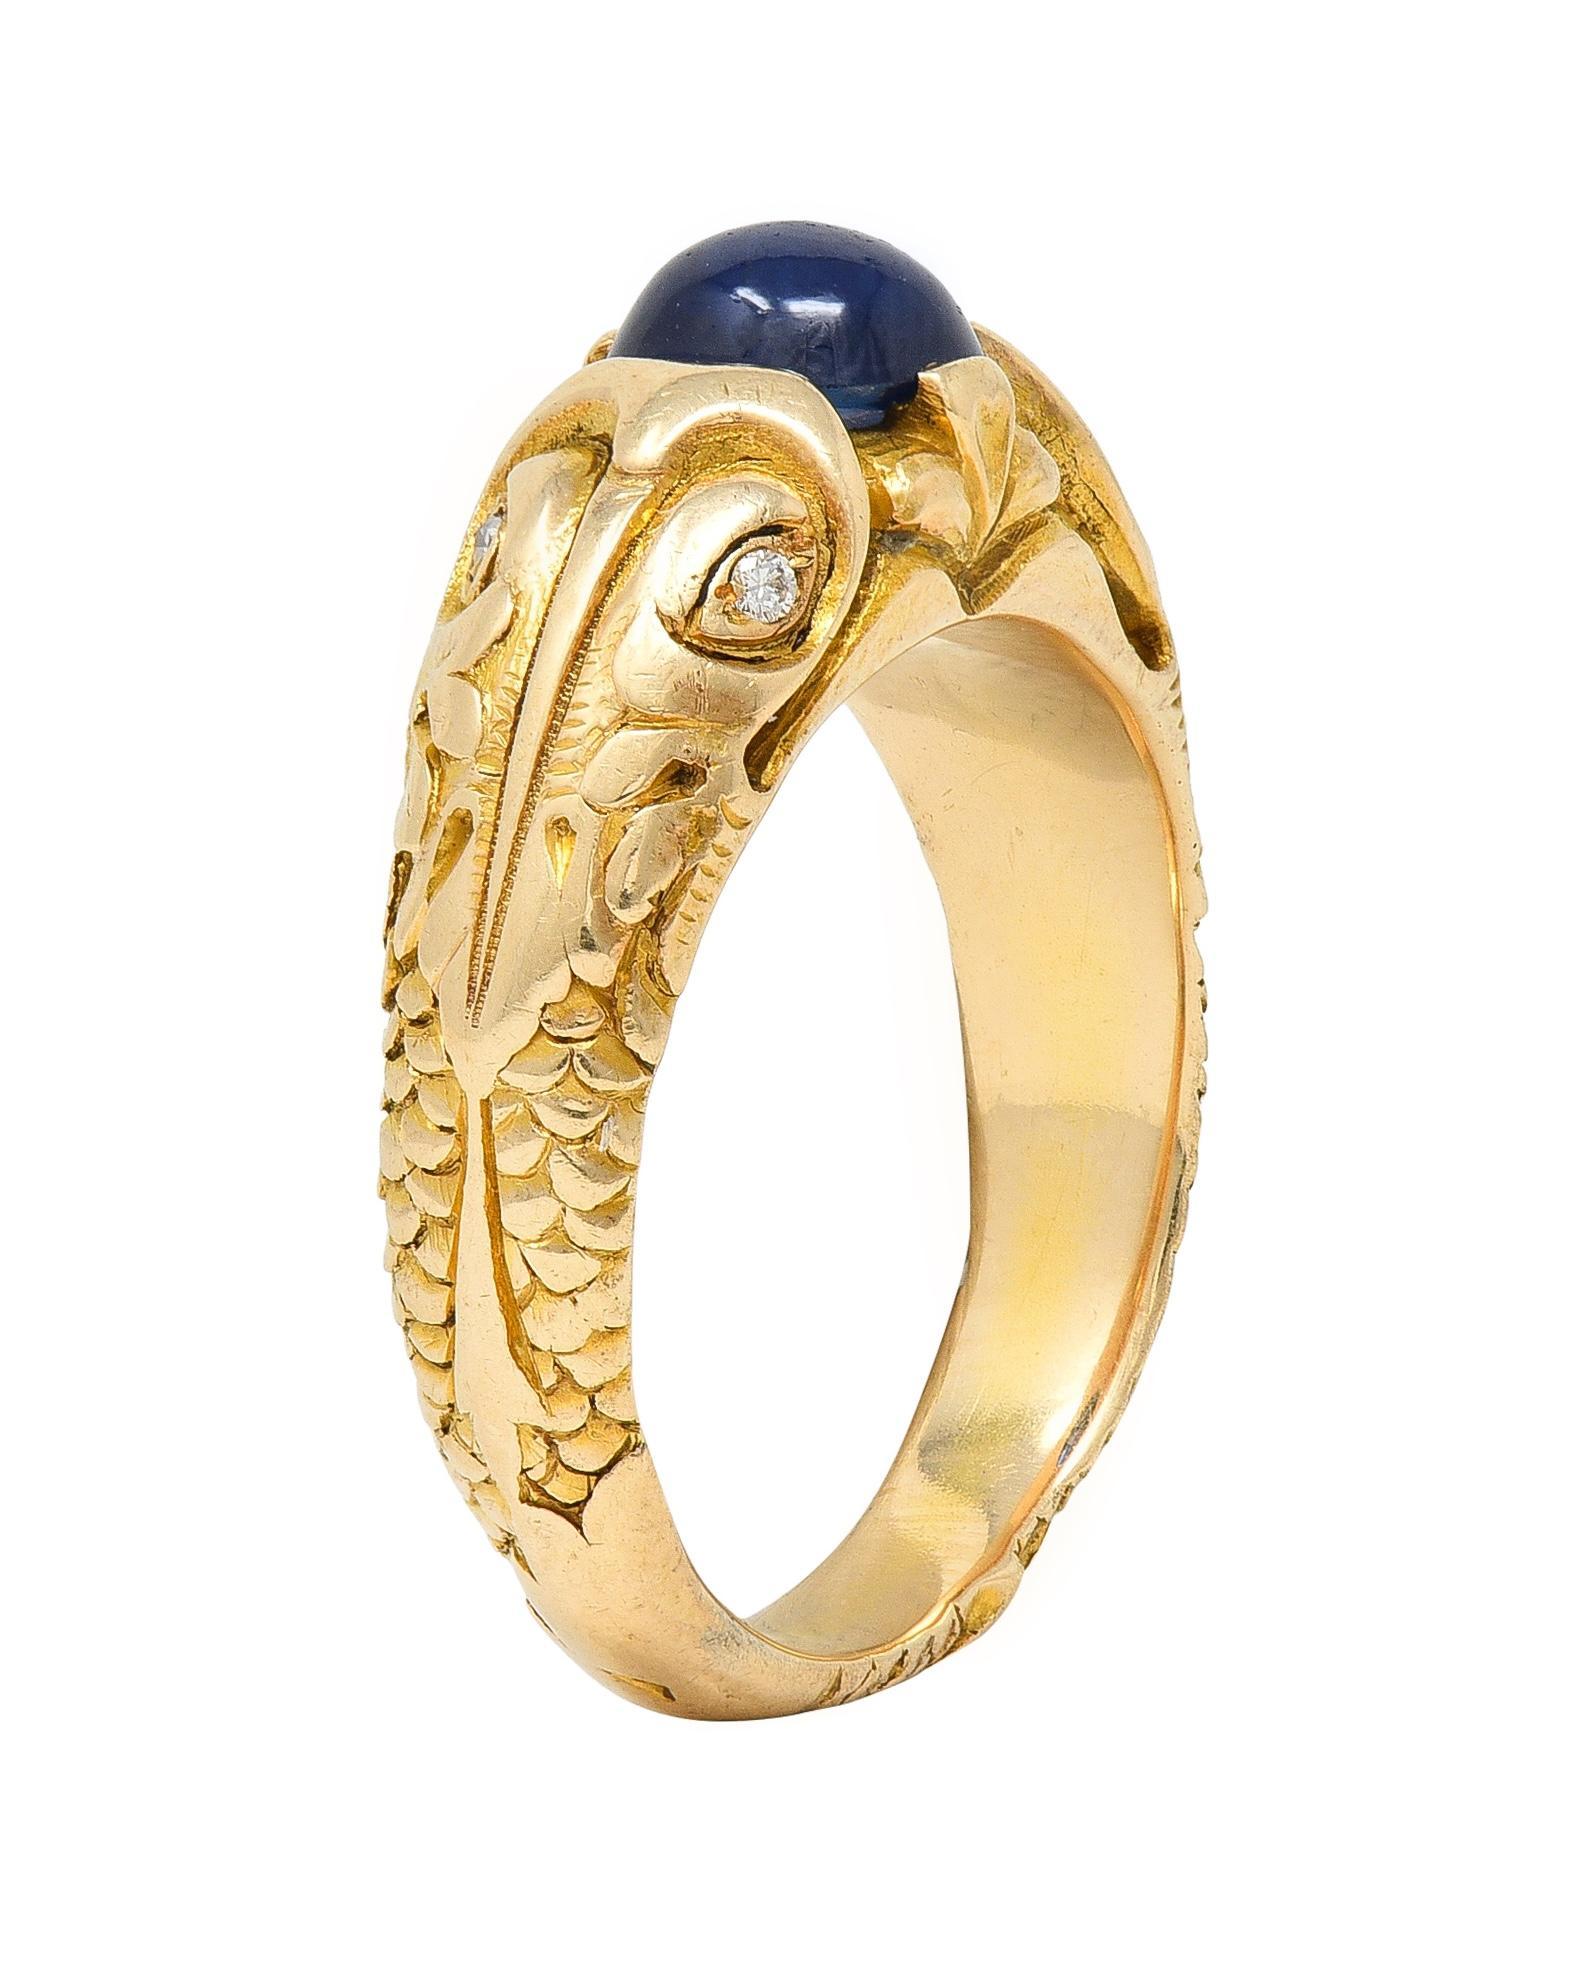 Centering an oval-shaped sapphire cabochon weighing approximately 1.61 carats total
Transparent medium blue in color and flush set in a highly rendered surround
Depicting two stylized koi fish shoulders with engraved features
With grooved texturous